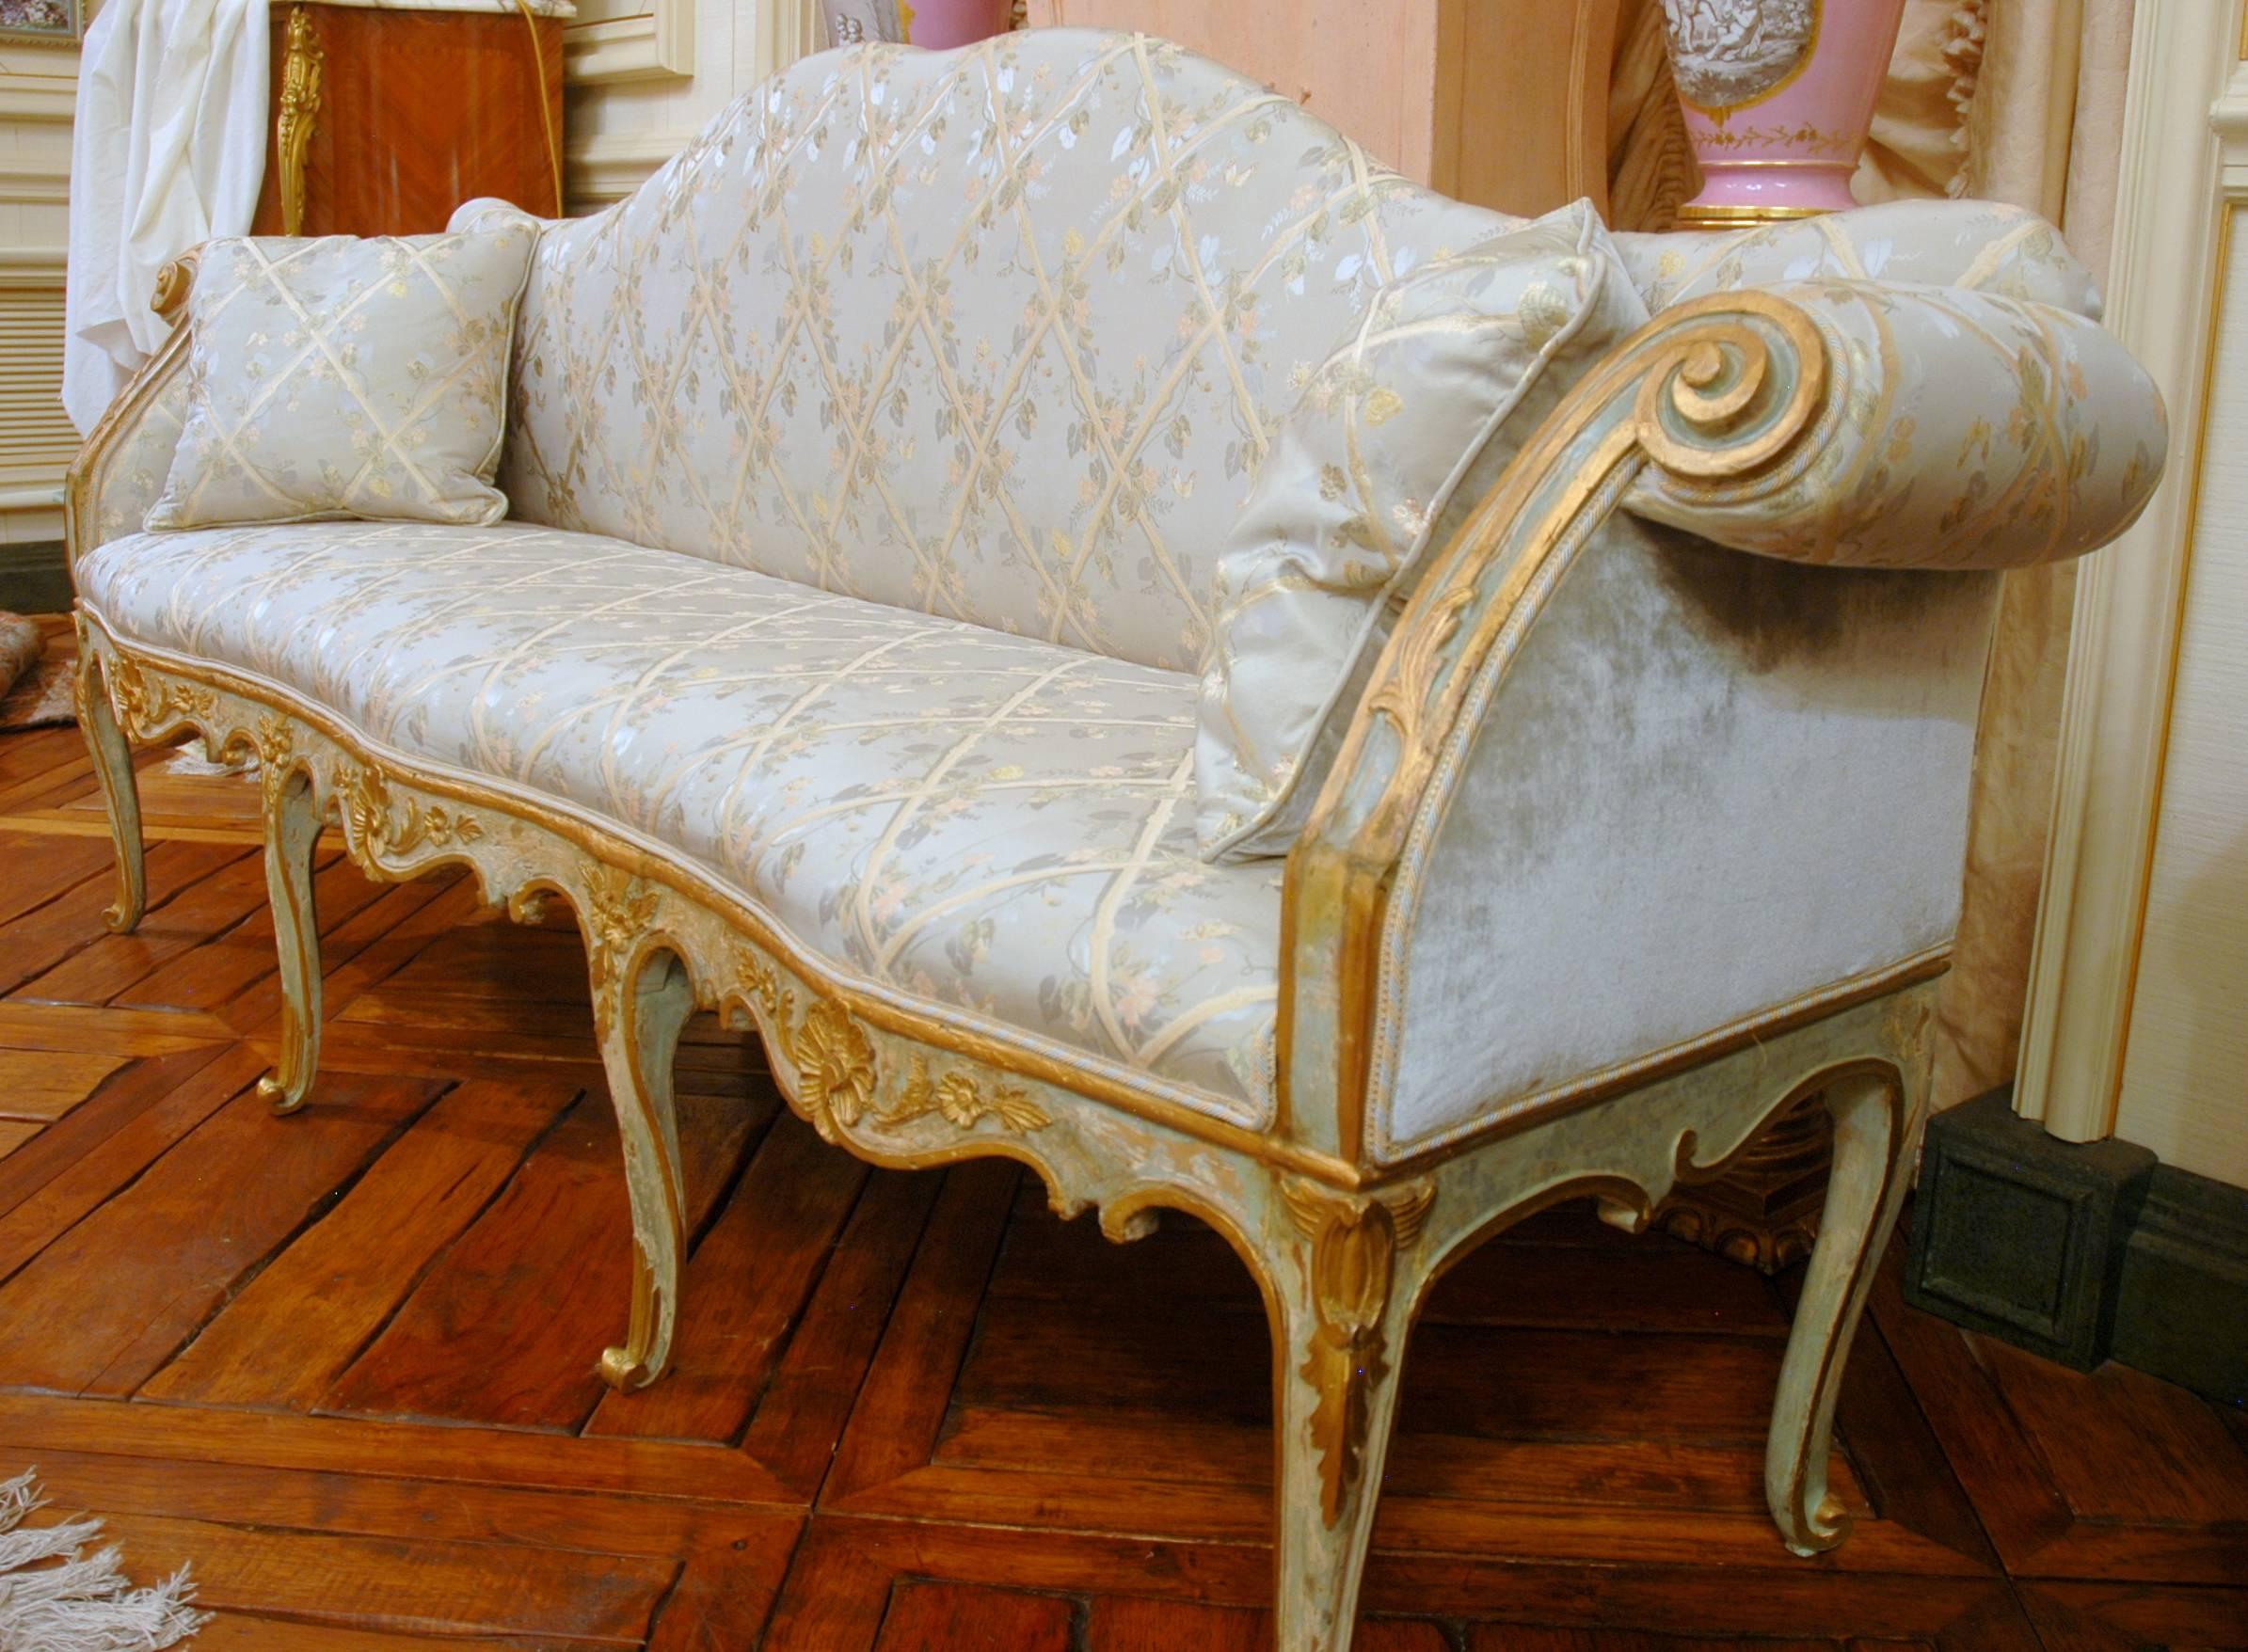 Painted and gilt Venetian Louis XV settee is highly decorative
and quite suitable for an entry as it is only 21